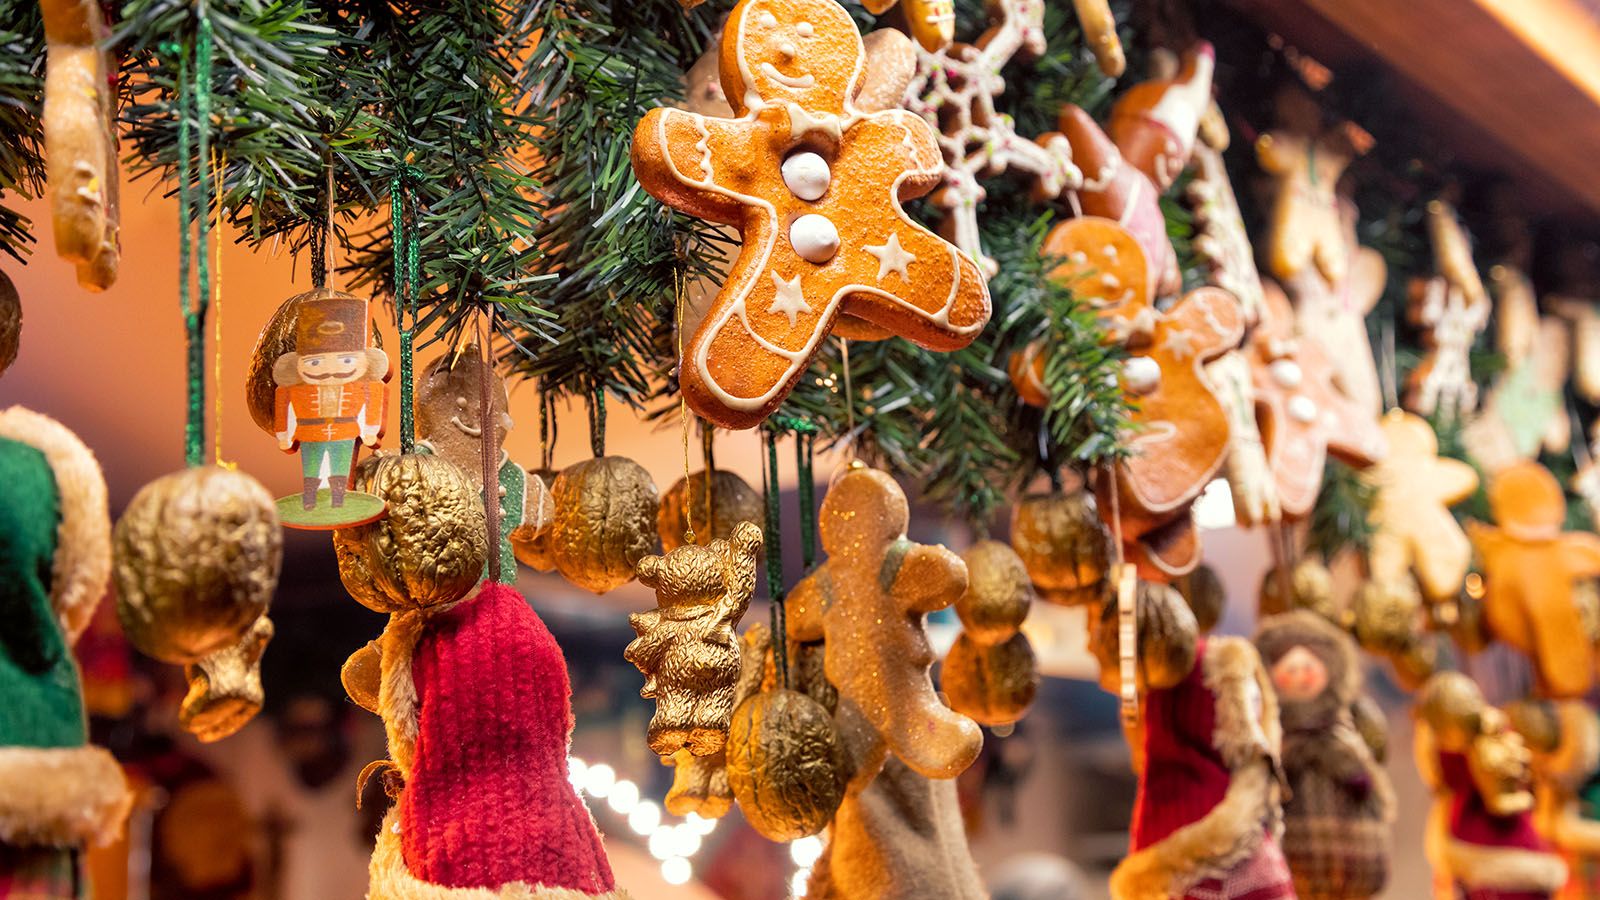 The Christkindlmarkt on Nov. 11 at Park Edelweiss will be an authentic German shopping experience.